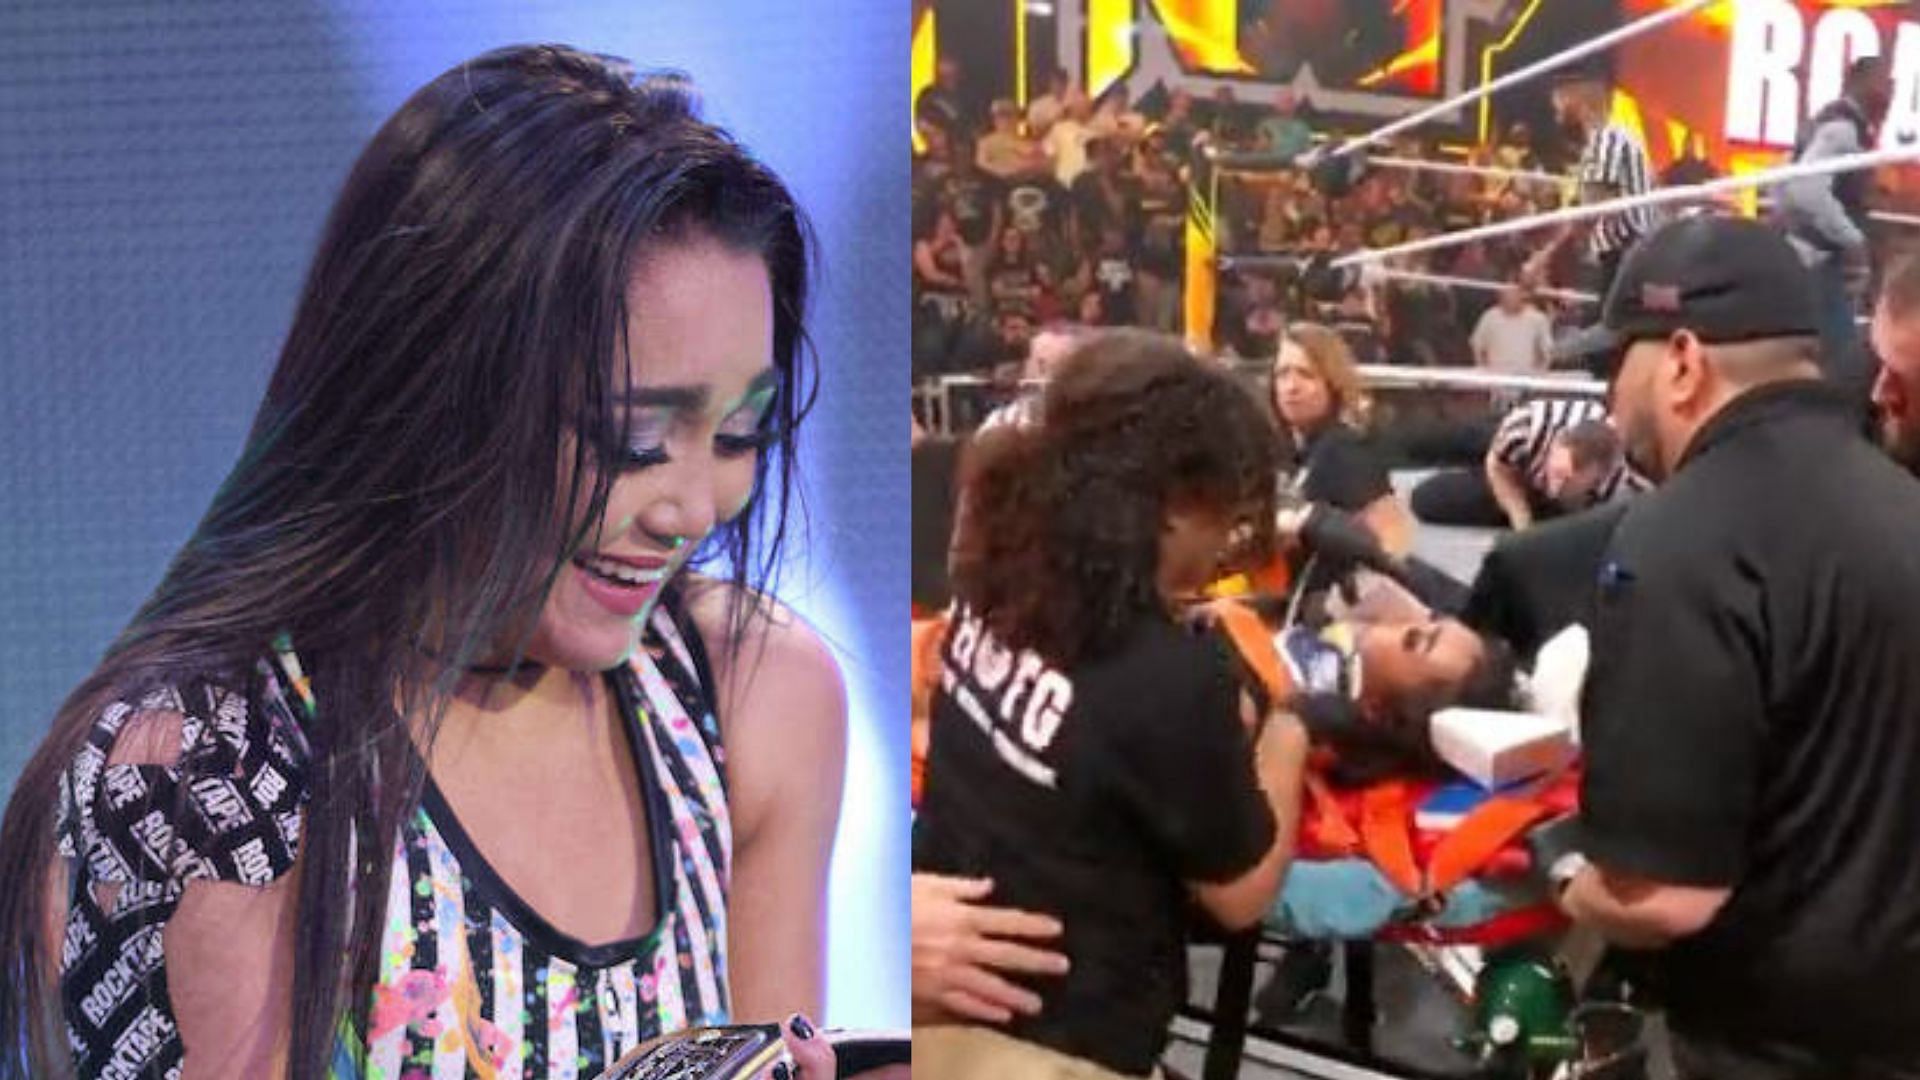 WWE Hall of Famers rushed to Roxanne Perez after health scare on NXT event